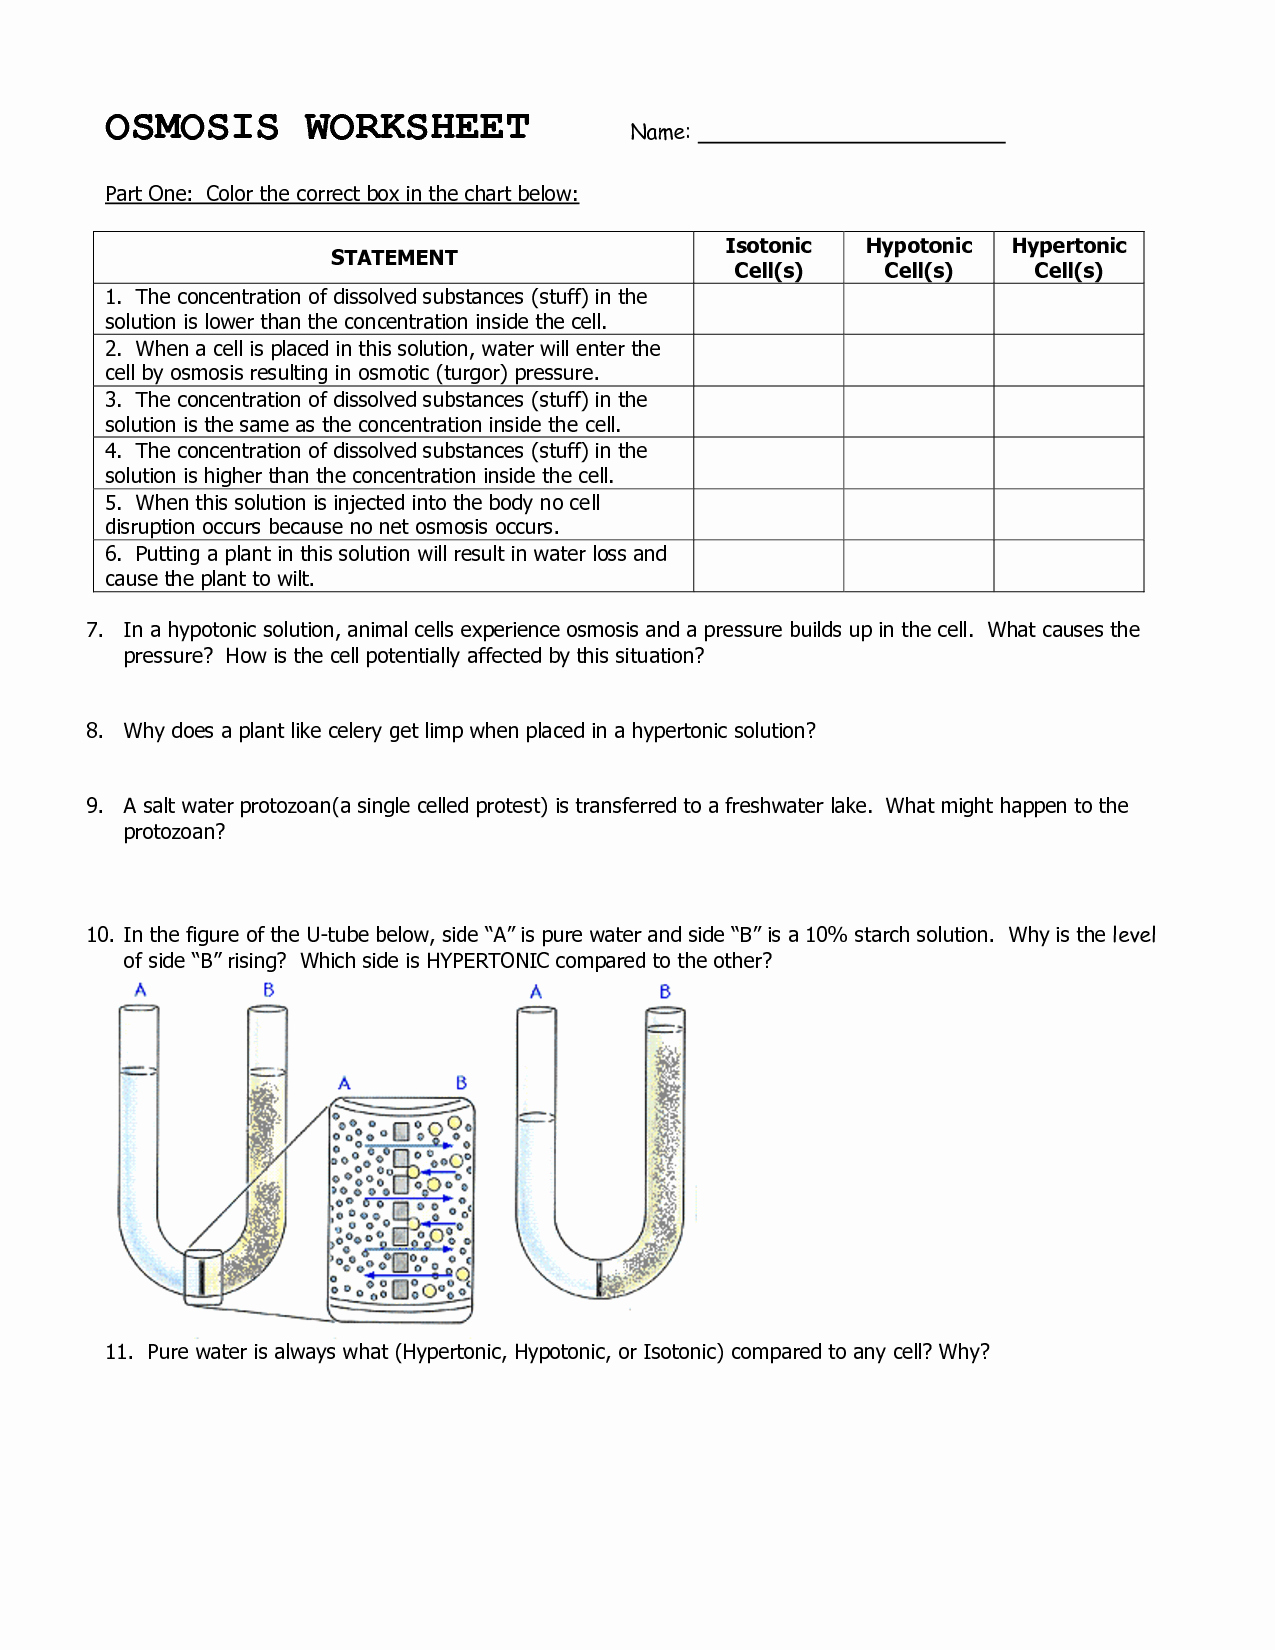 Diffusion and Osmosis Worksheet Answers Inspirational Class Notes and Hand Outs Ms Mirshafie S Course Page